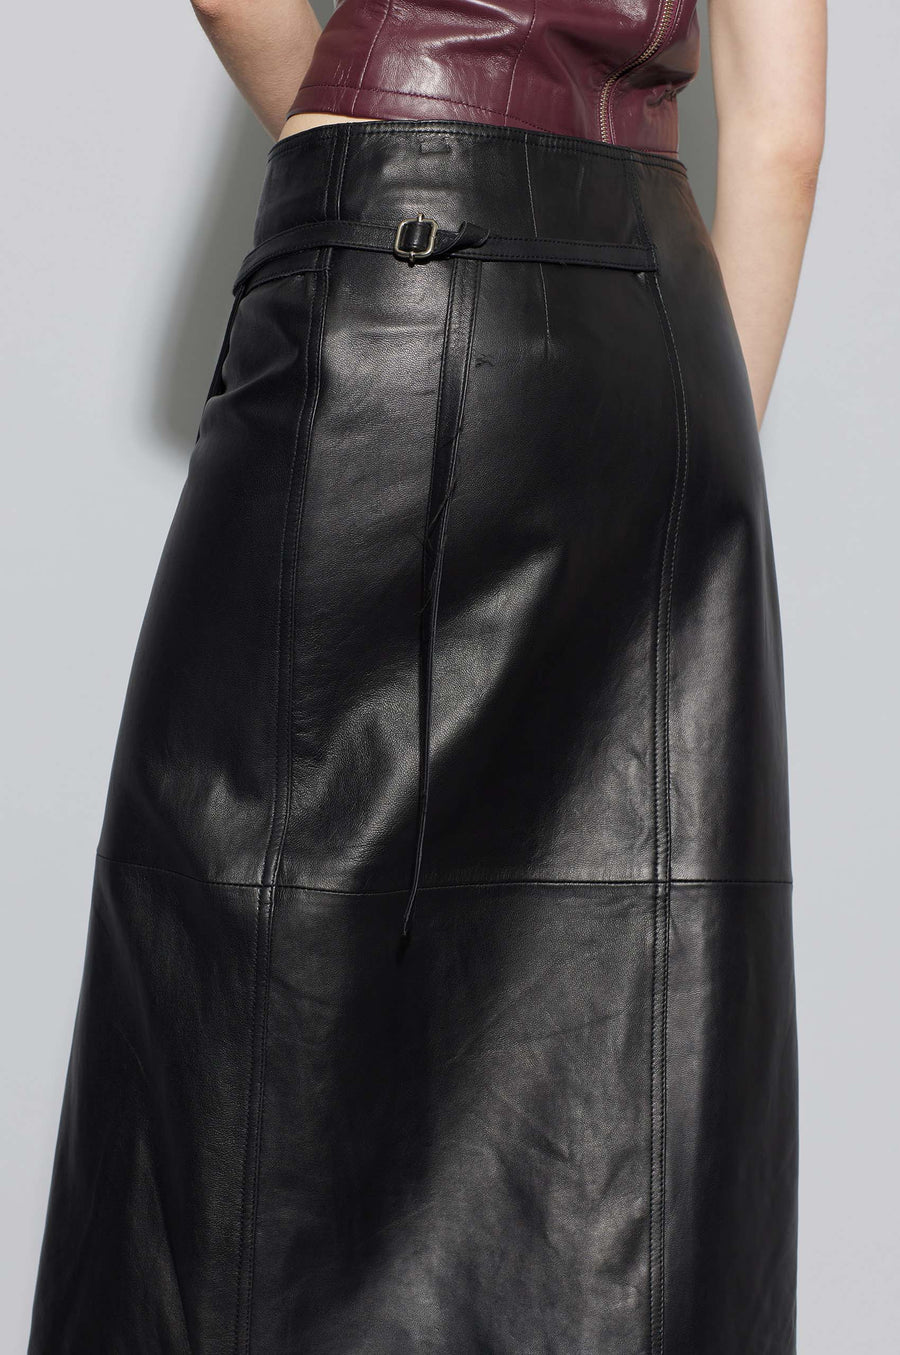 Oval Square Reflection Leather Skirt